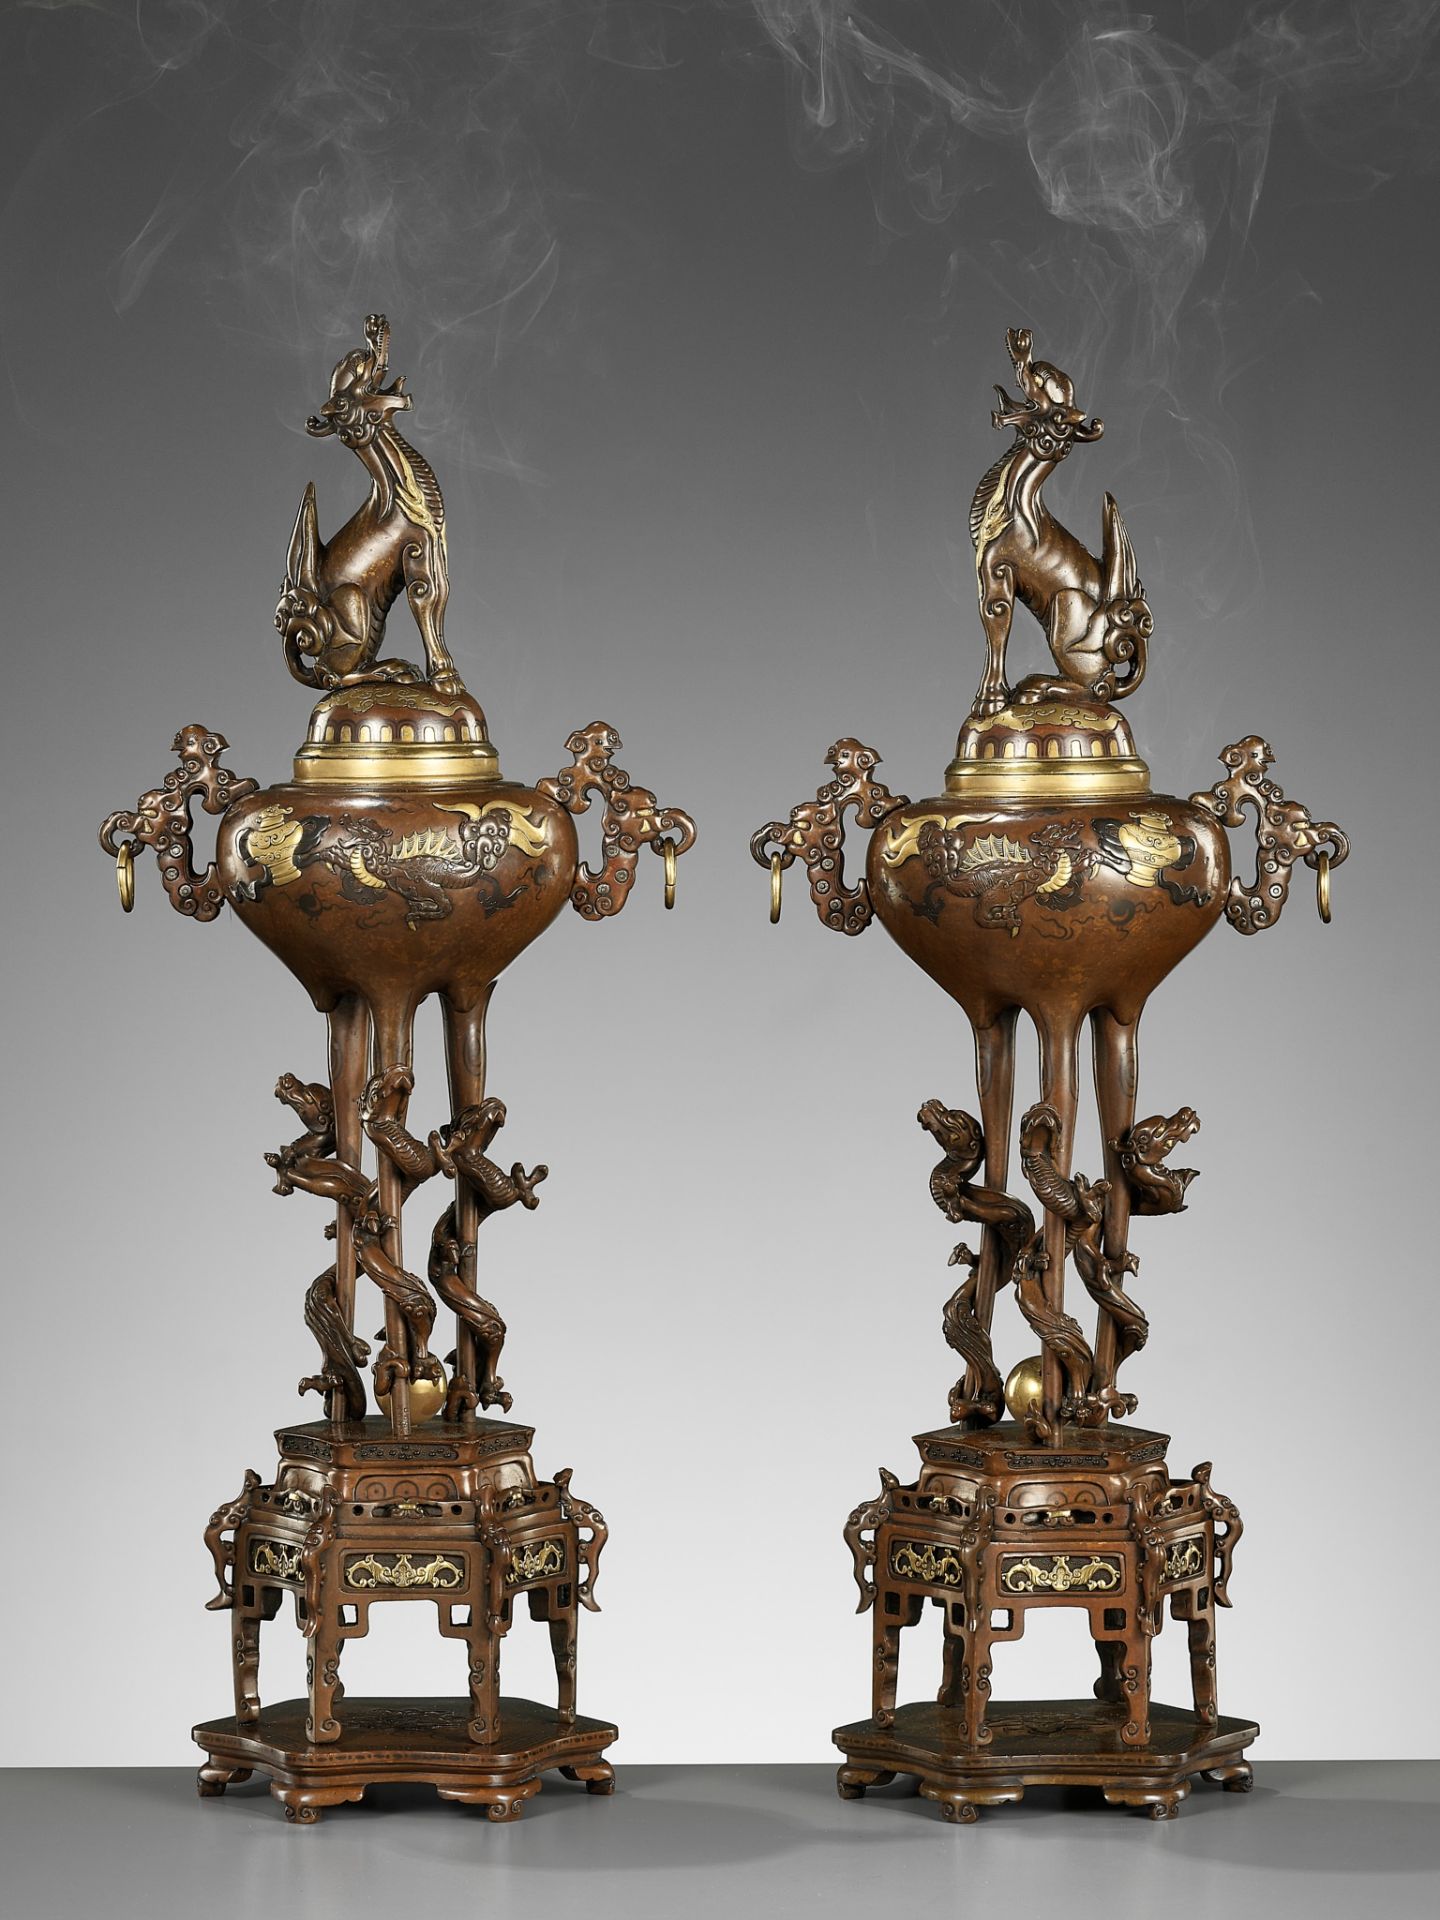 A PAIR OF SUPERB TAKAOKA GOLD-INLAID BRONZE 'MYTHICAL BEASTS' KORO (INCENSE BURNERS) AND COVERS